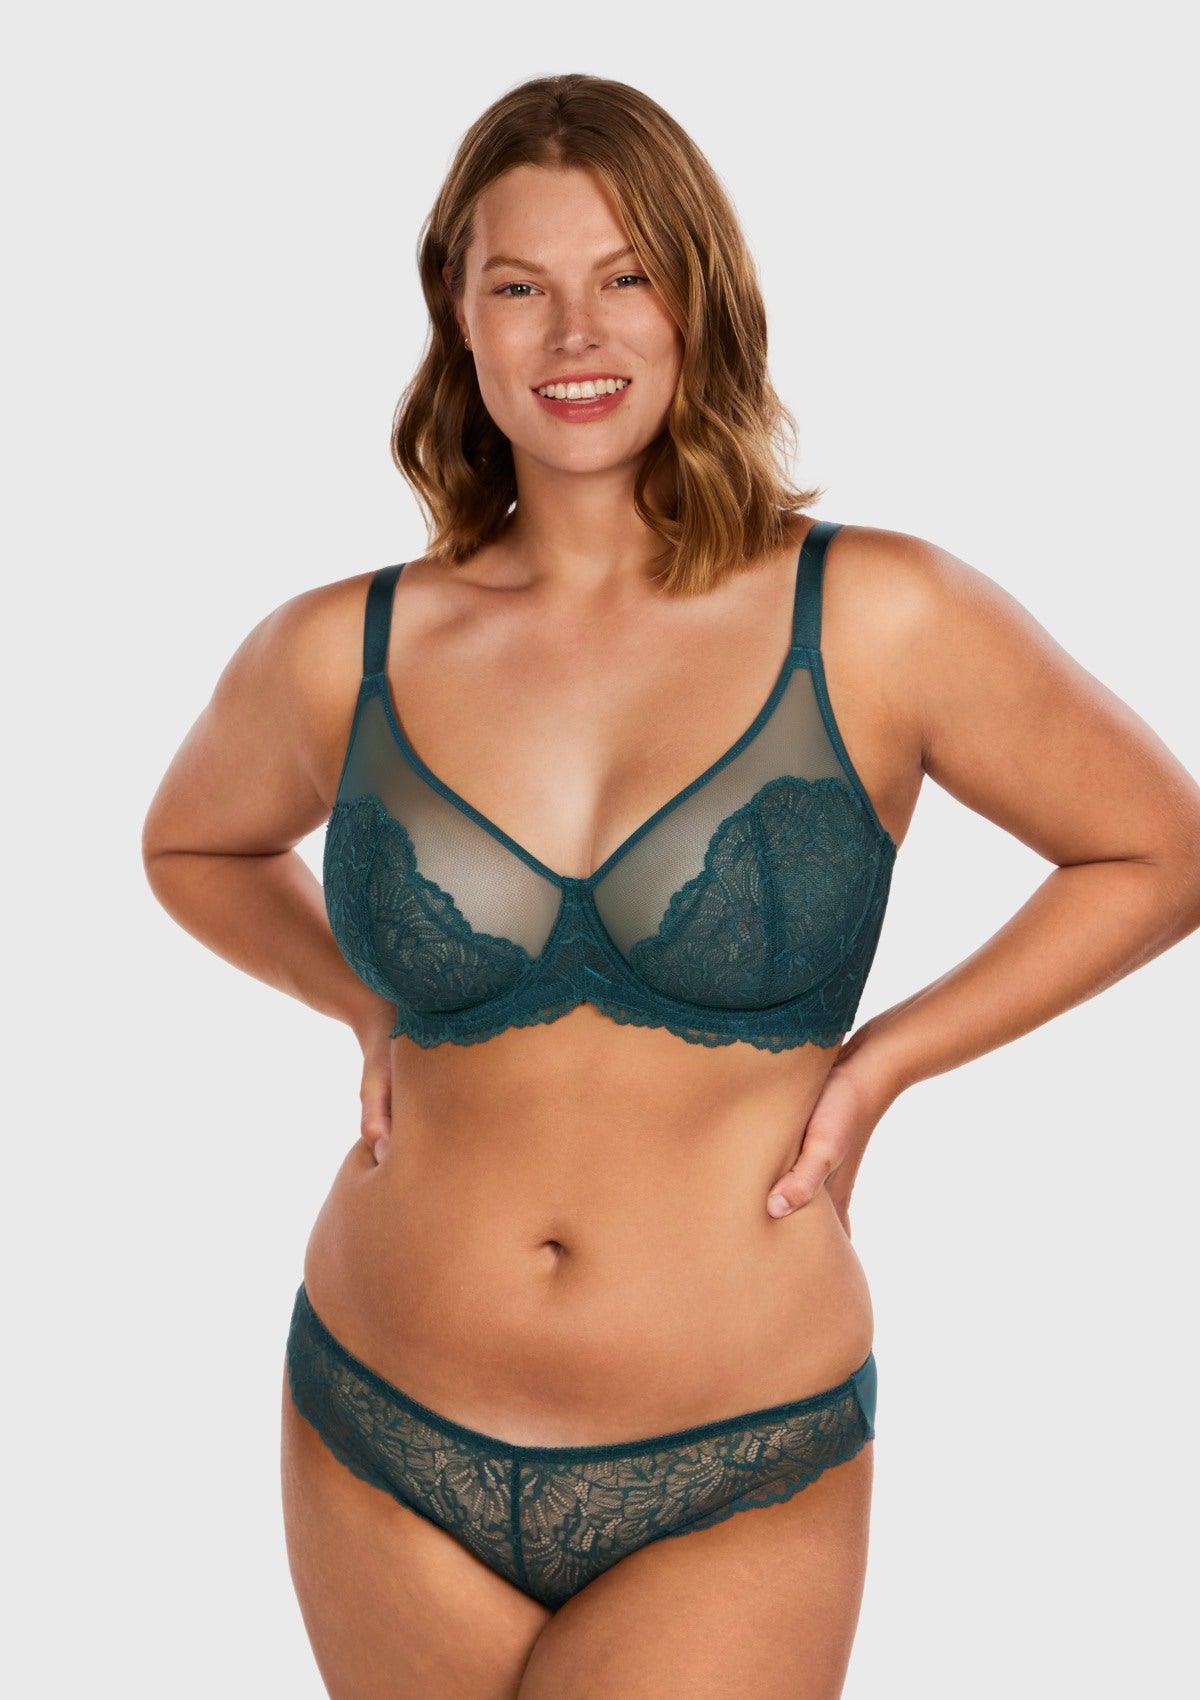 HSIA Blossom Full Figure See-Through Lace Bra For Side And Back Fat - Balsam Blue / 42 / G